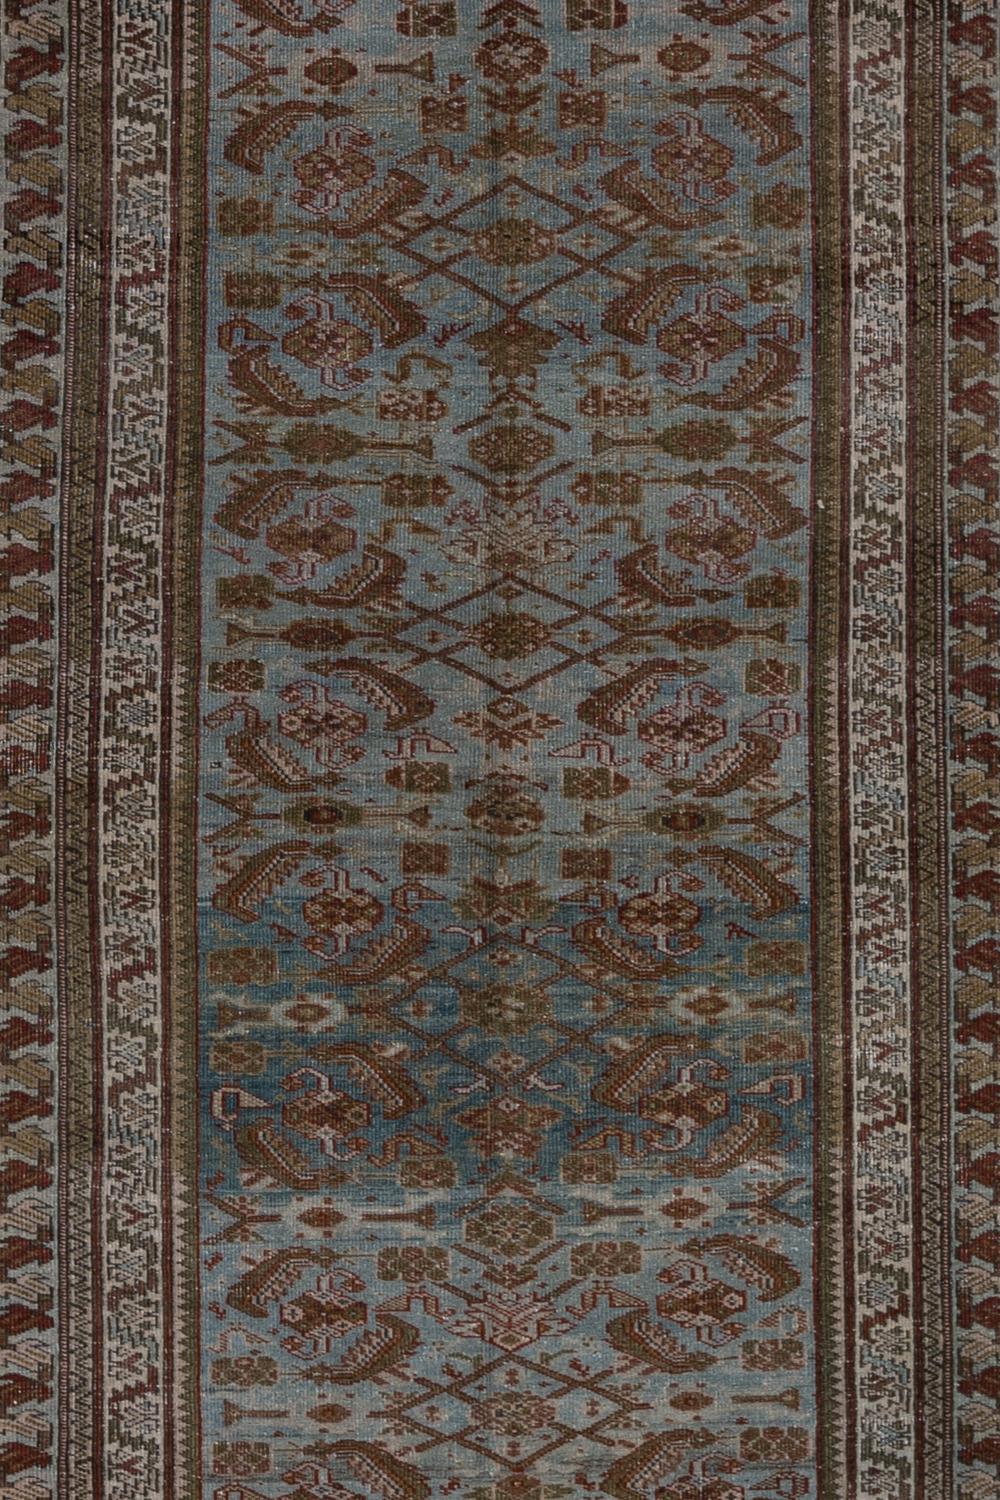 Age: early 20th century 

Pile: Low-medium (soft underfoot)

Wear Notes: 0-1

Material: Wool on Cotton

Vintage rugs are made by hand over the course of months, sometimes years. Their imperfections and wear are evidence of the hard working